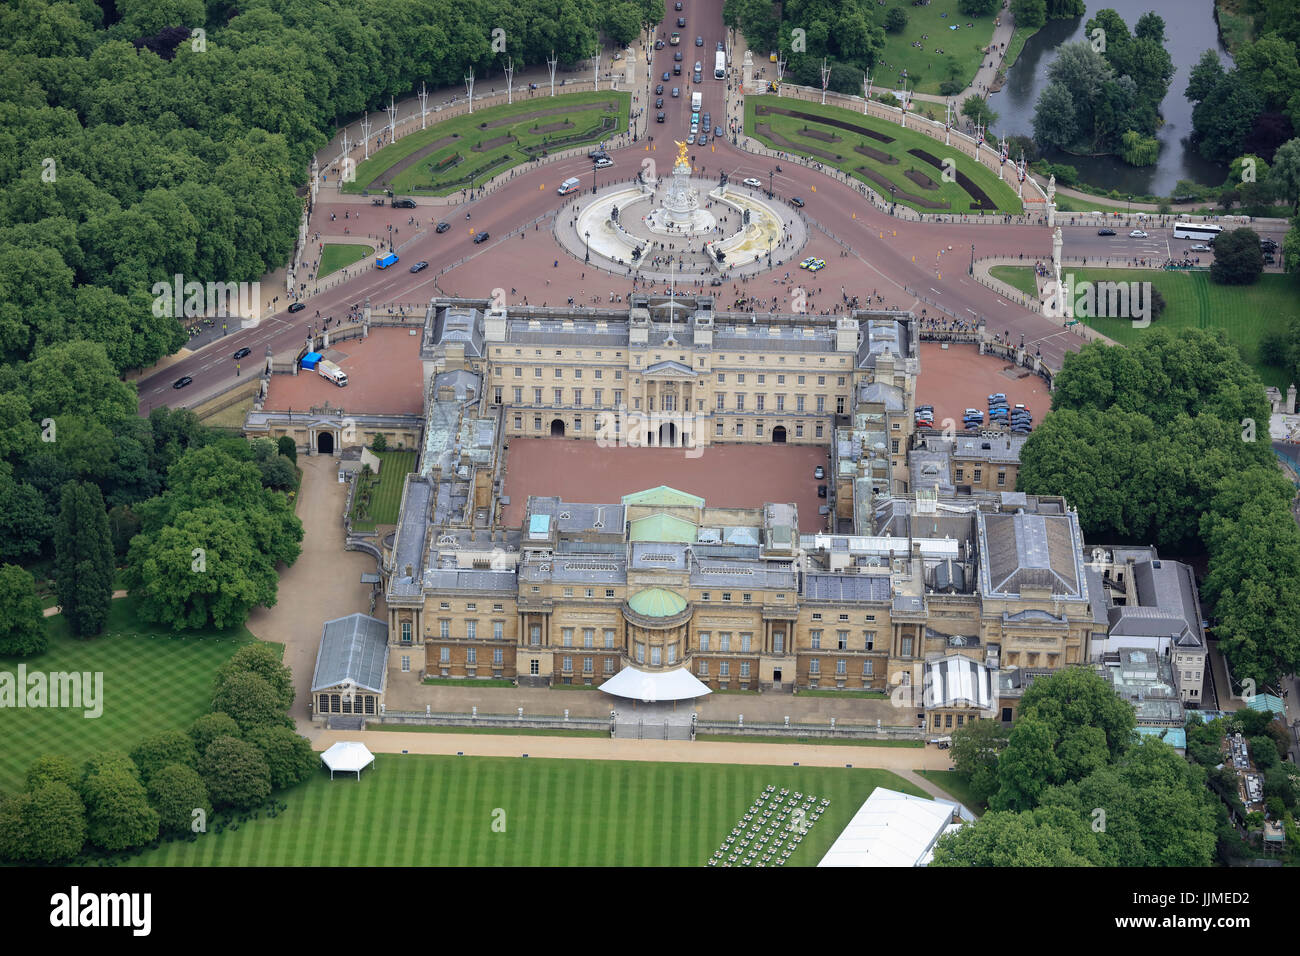 An aerial view of the rear of Buckingham Palace  with the Albert Memorial and top of The Mall visible Stock Photo